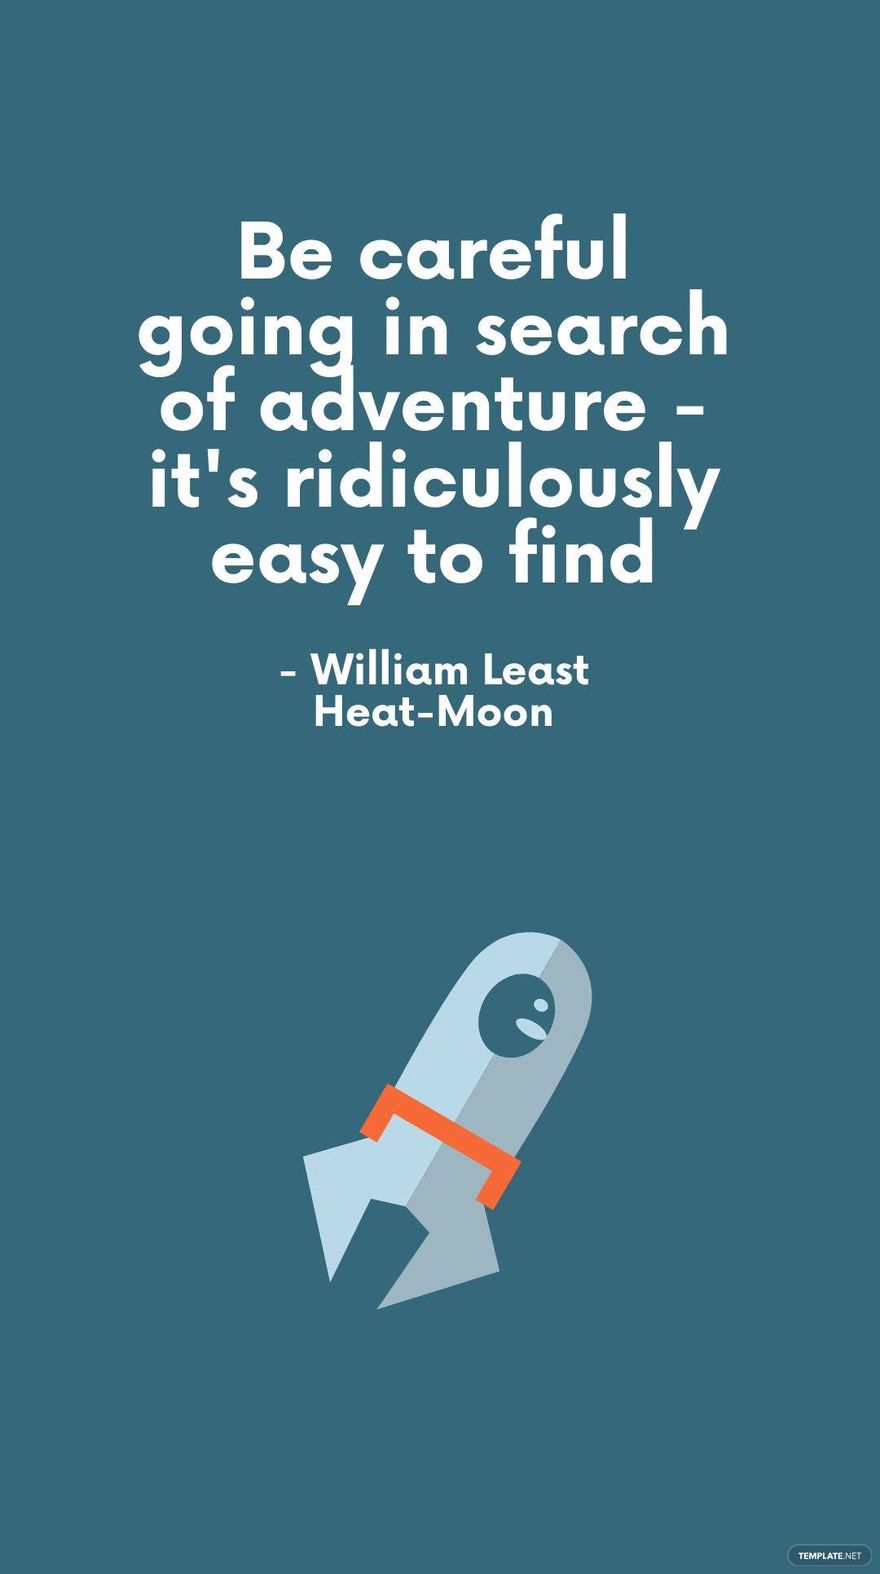 William Least Heat-Moon - Be careful going in search of adventure - it's ridiculously easy to find